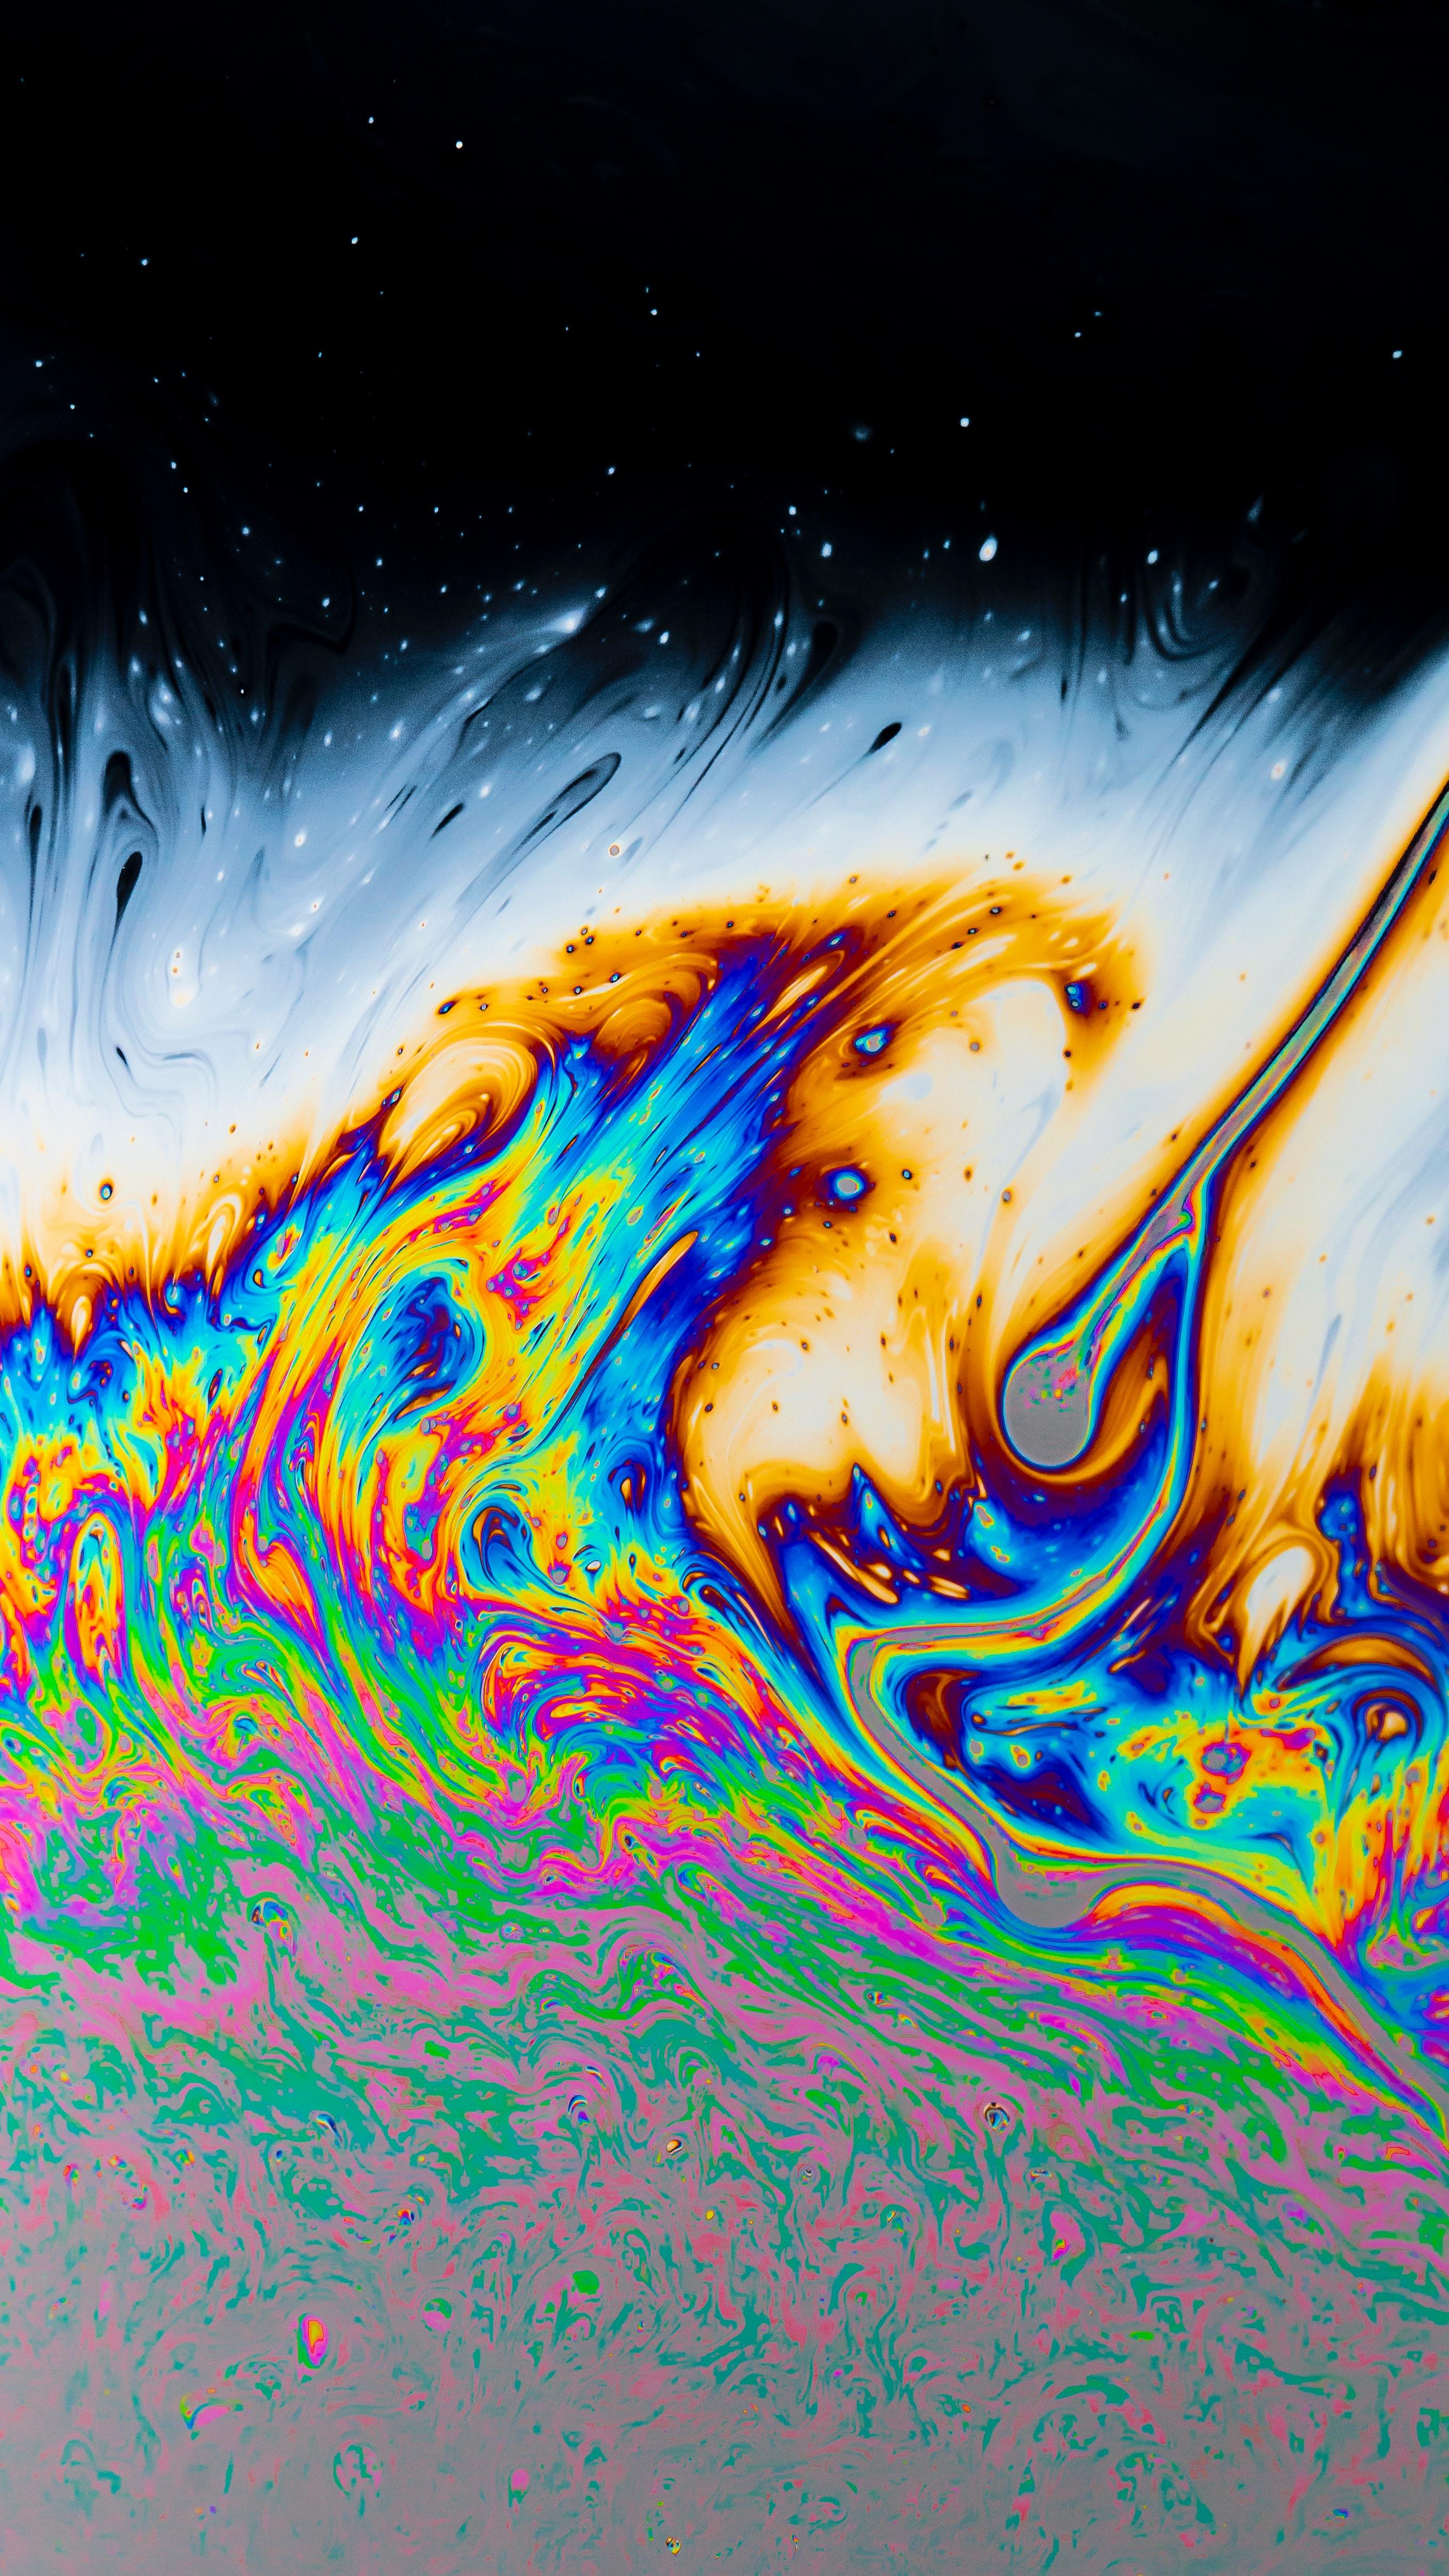 Download wallpaper 2716x4829 fluid, stains, lines, spots, colorful